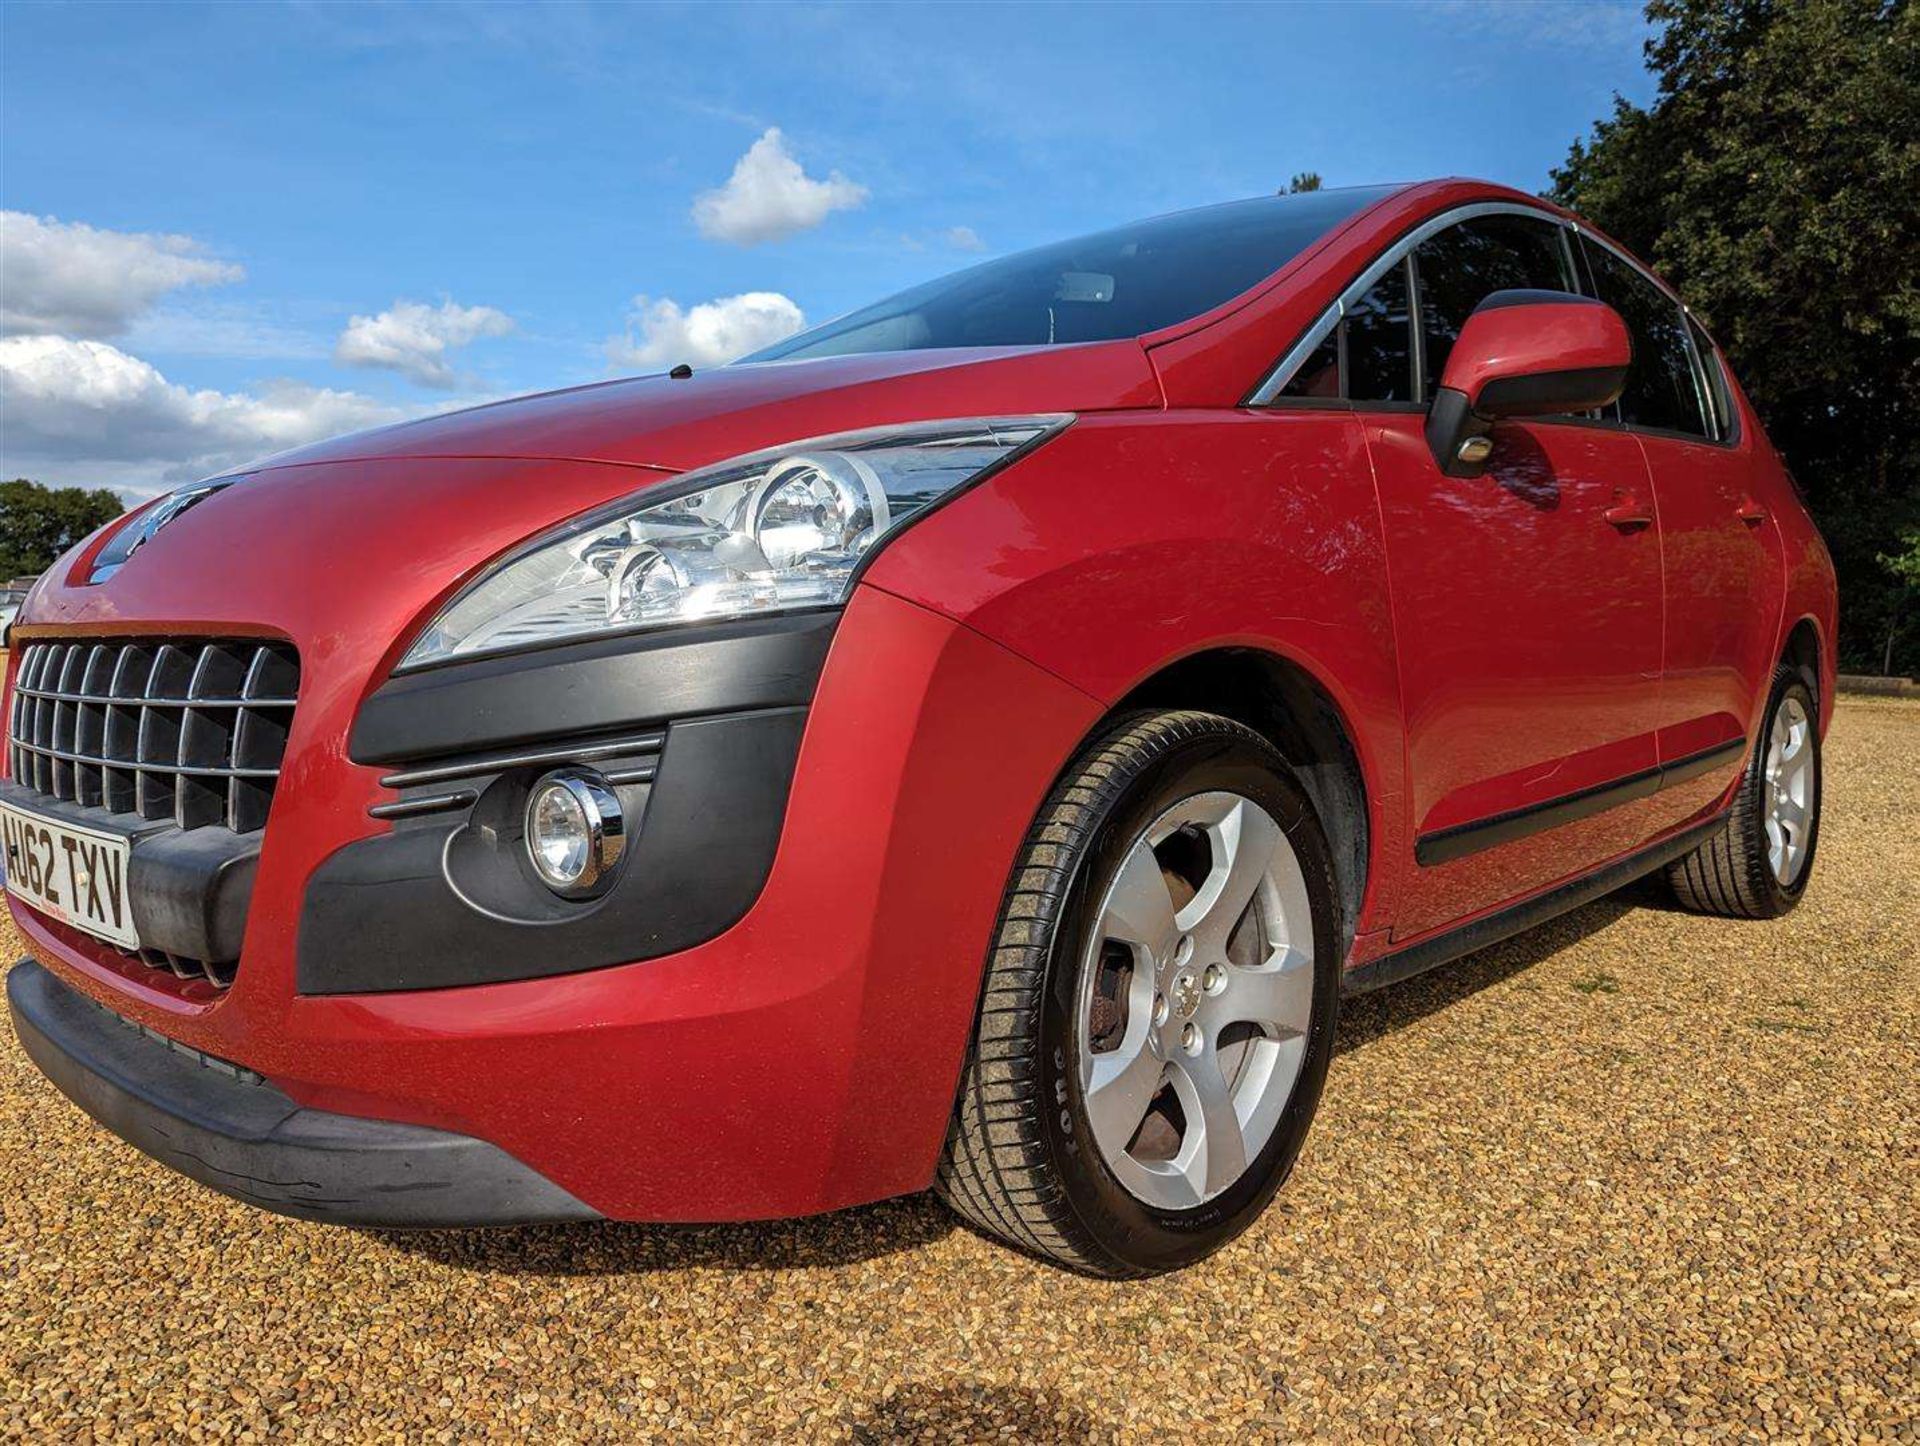 2012 PEUGEOT 3008 ACTIVE HDI - Image 10 of 24